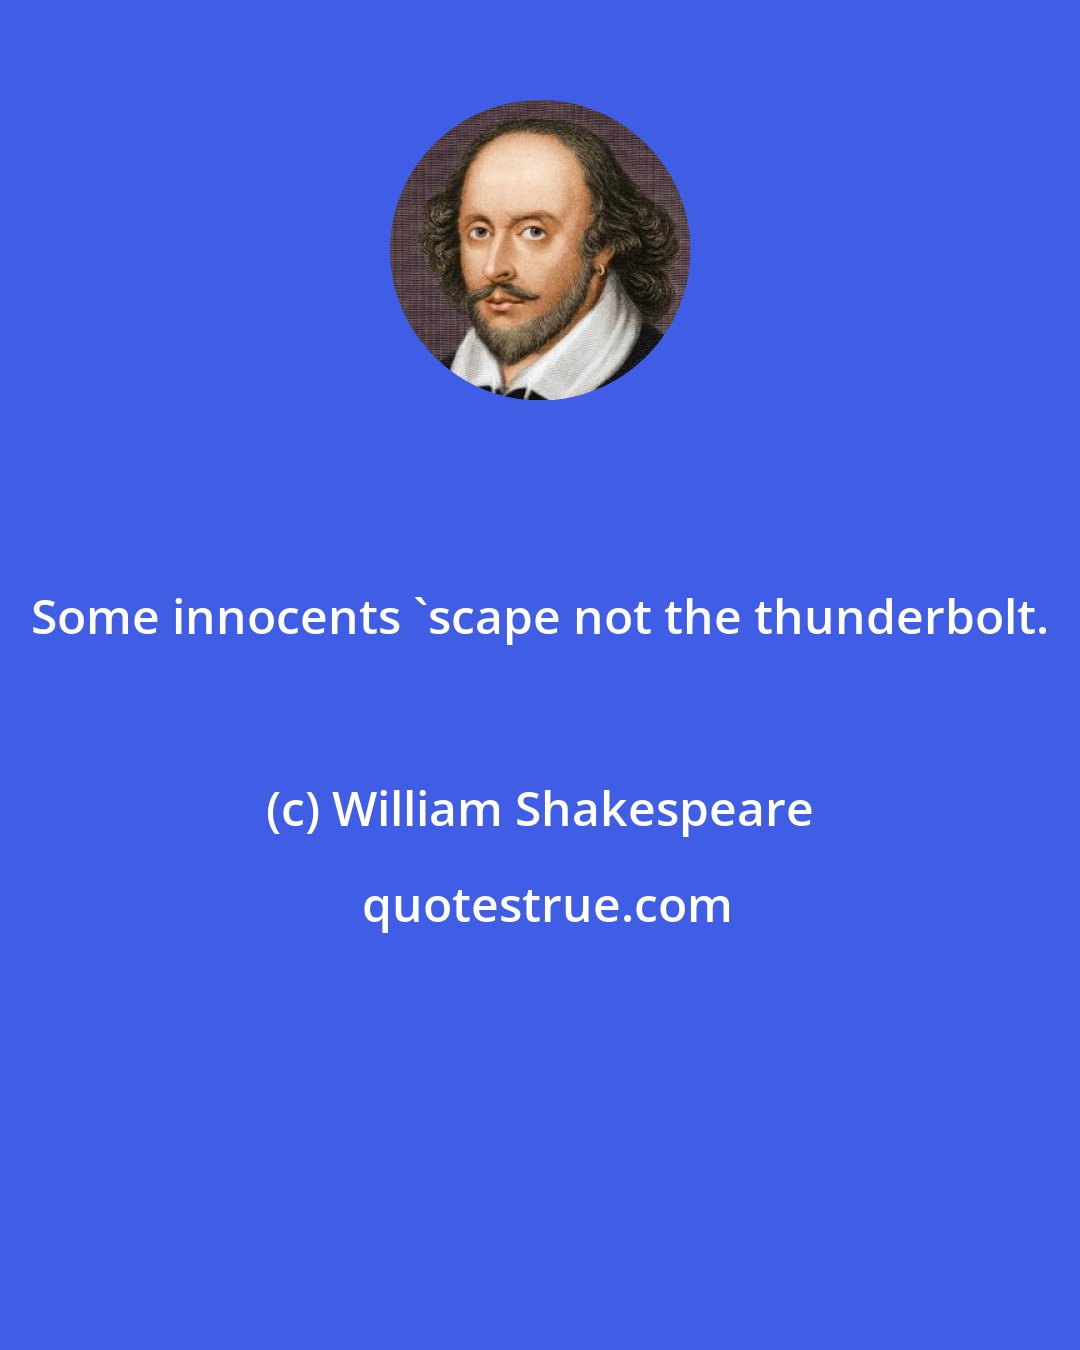 William Shakespeare: Some innocents 'scape not the thunderbolt.